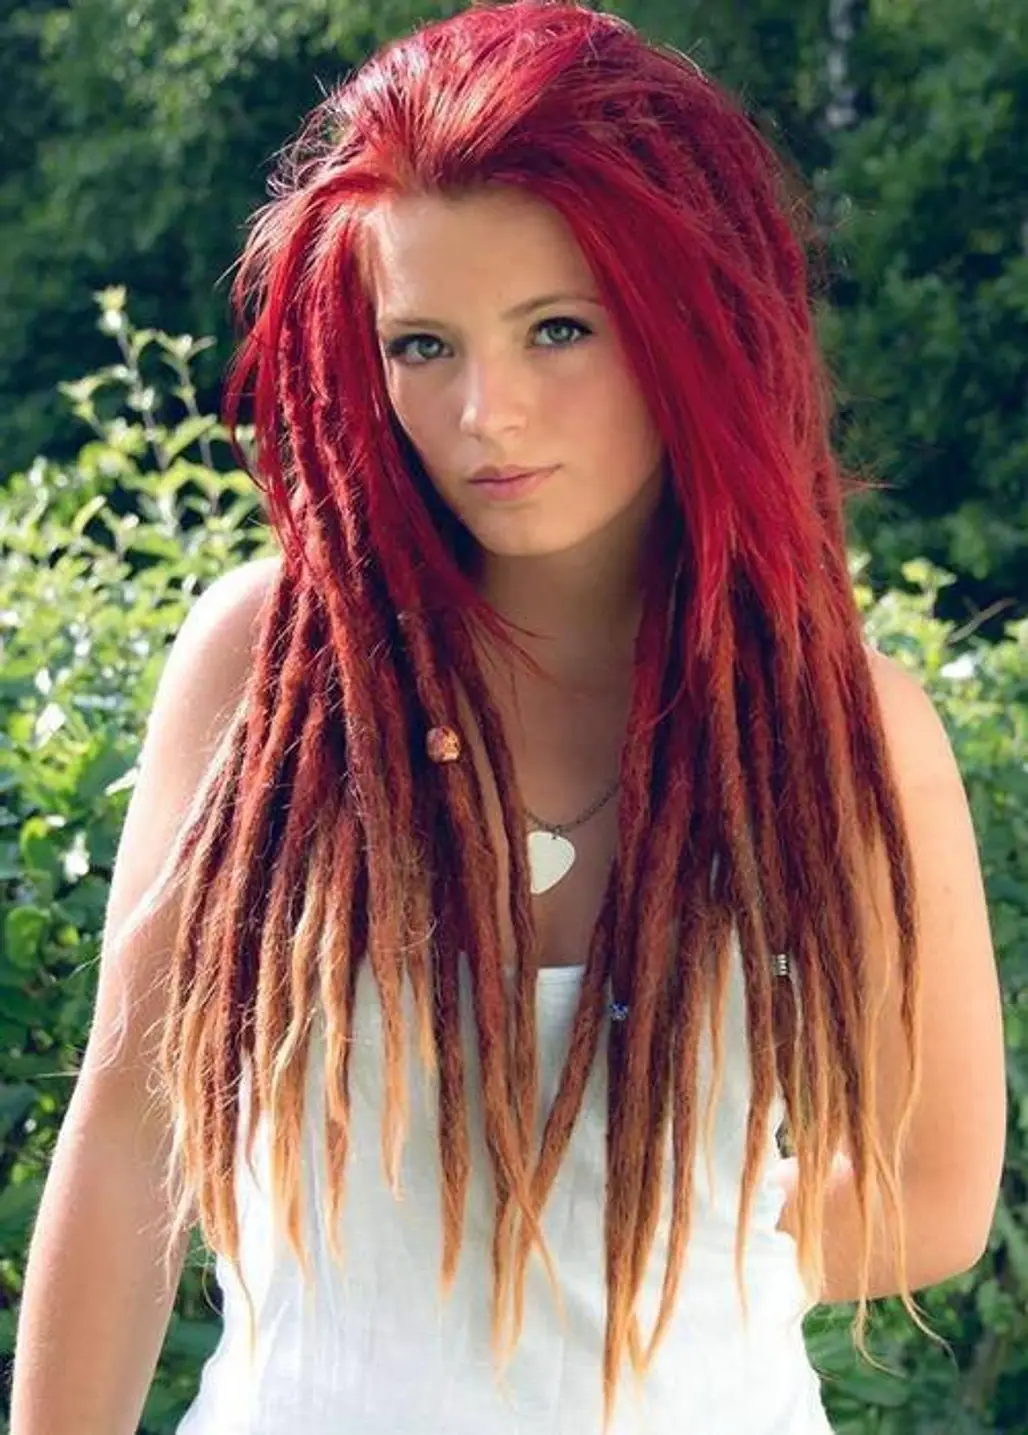 hair,human hair color,clothing,hairstyle,red,